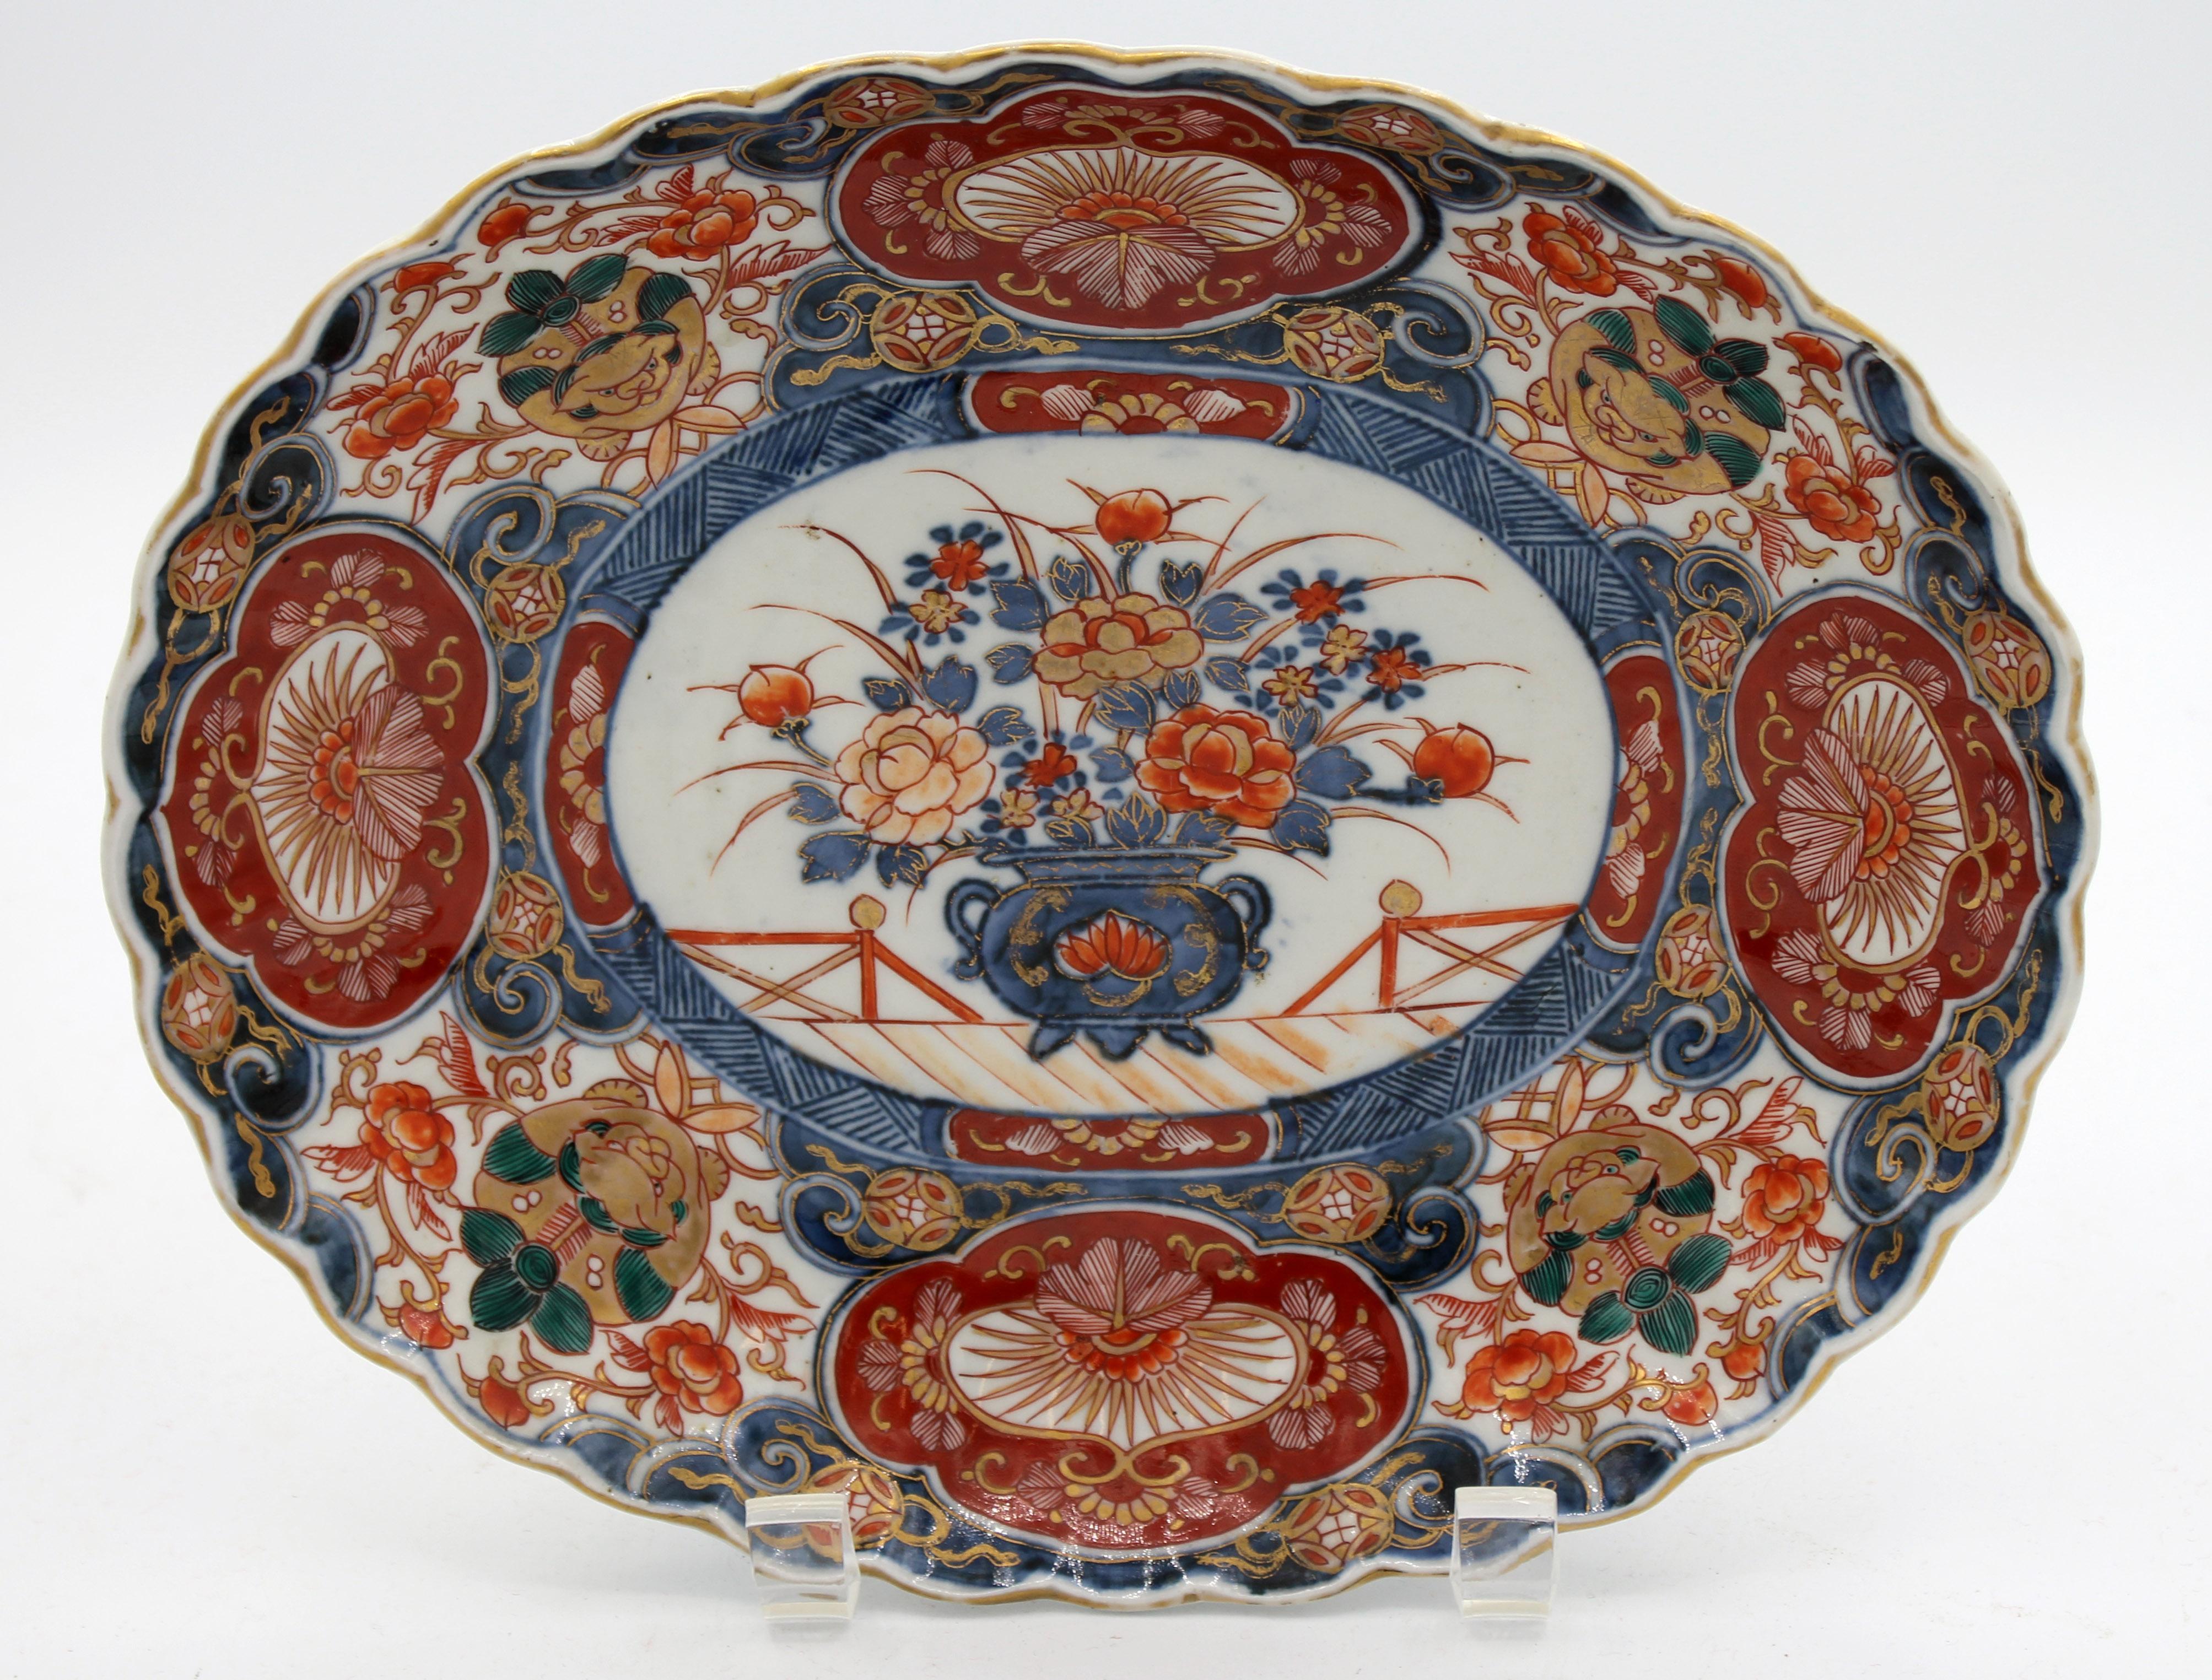 Late Edo period, c.1860, small Imari oval platter. Ribbed body superbly decorated with an urn of peonies in the central reserve is surrounded by eight small reserves, four with deep green and gilt kylin guardians. Measures: 9 7/8